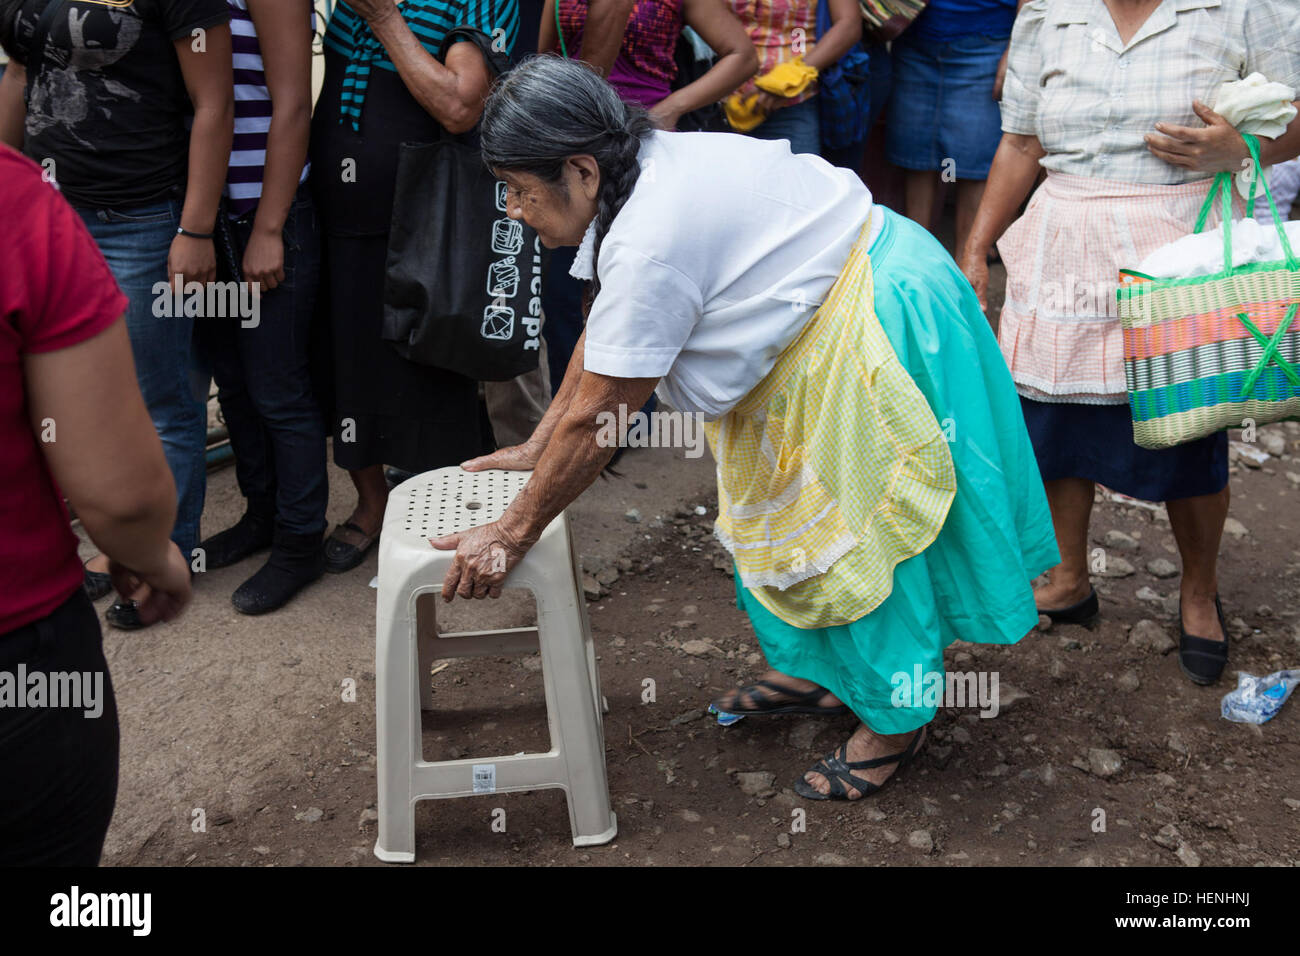 An elderly woman uses a stool as a walker while awaiting a Medical Readiness Training Exercise provided by Task Force Oso in support of Beyond the Horizon in Rio Grande, Guatemala, on June 3, 2014.  Beyond the Horizon is an annual exercise that embraces the partnership between the United States and Guatemala, to provide focused humanitarian assistance through various medical, dental, and civic action programs. (U.S. Army photo by Cpl. Michael Spandau/Released) Beyond The Horizon 2014, Guatemala 140603-A-TX665-002 Stock Photo